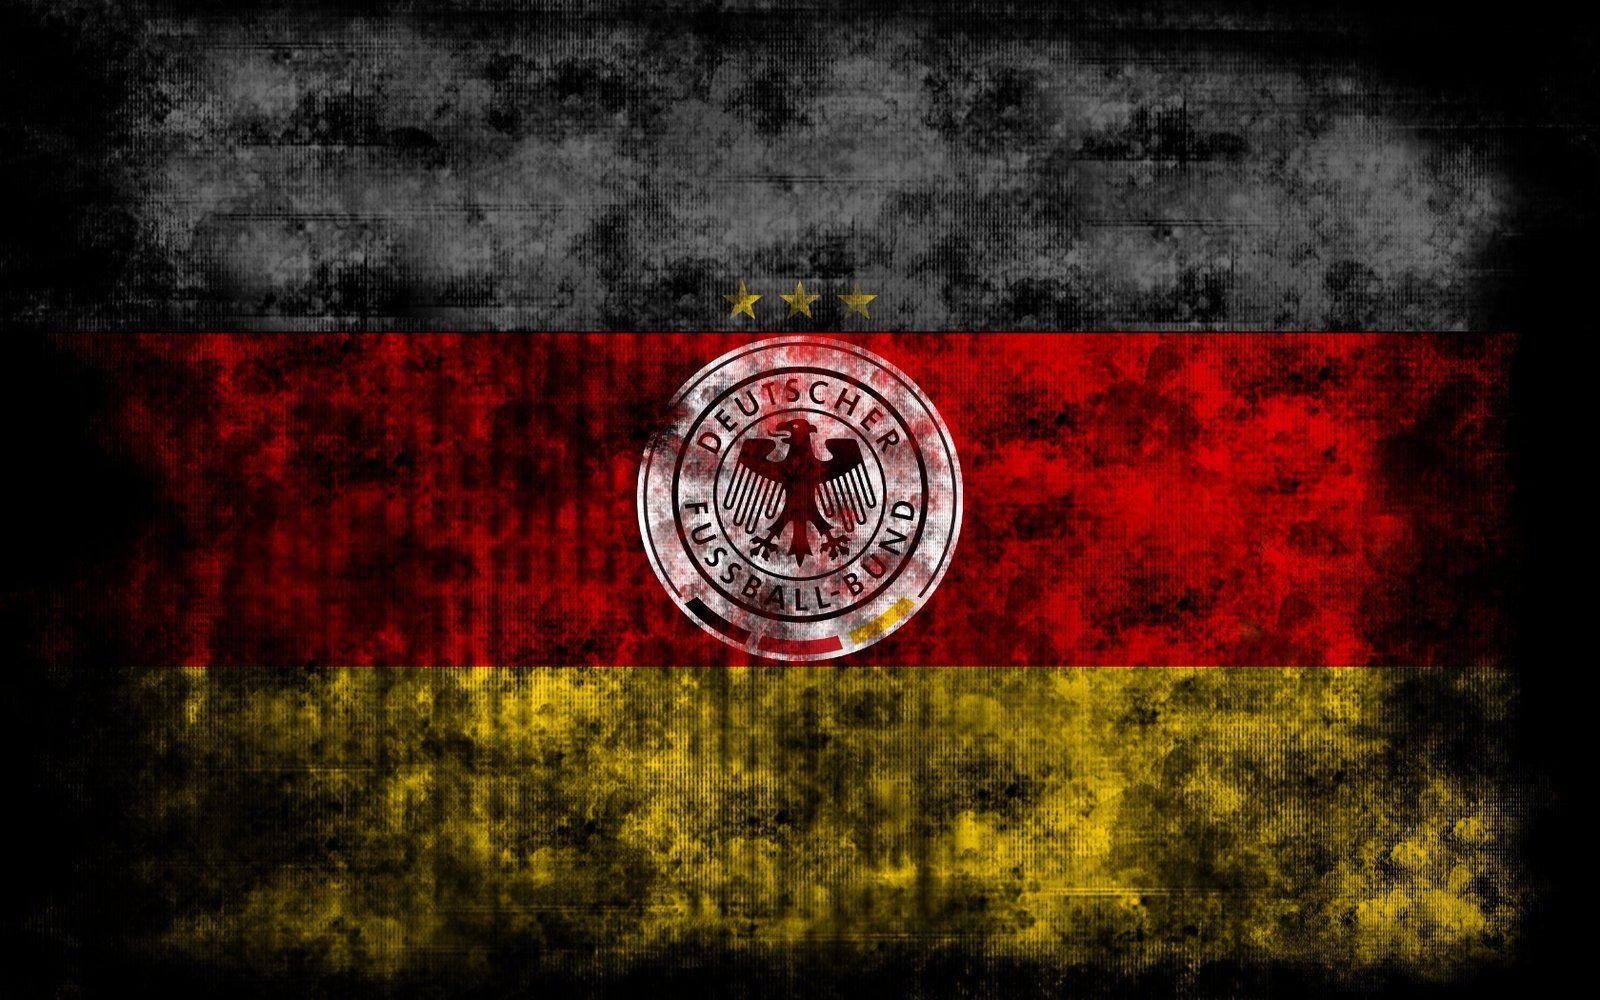 Gallery of 50 Awesome Germany Background, Wallpaper. B.SCB